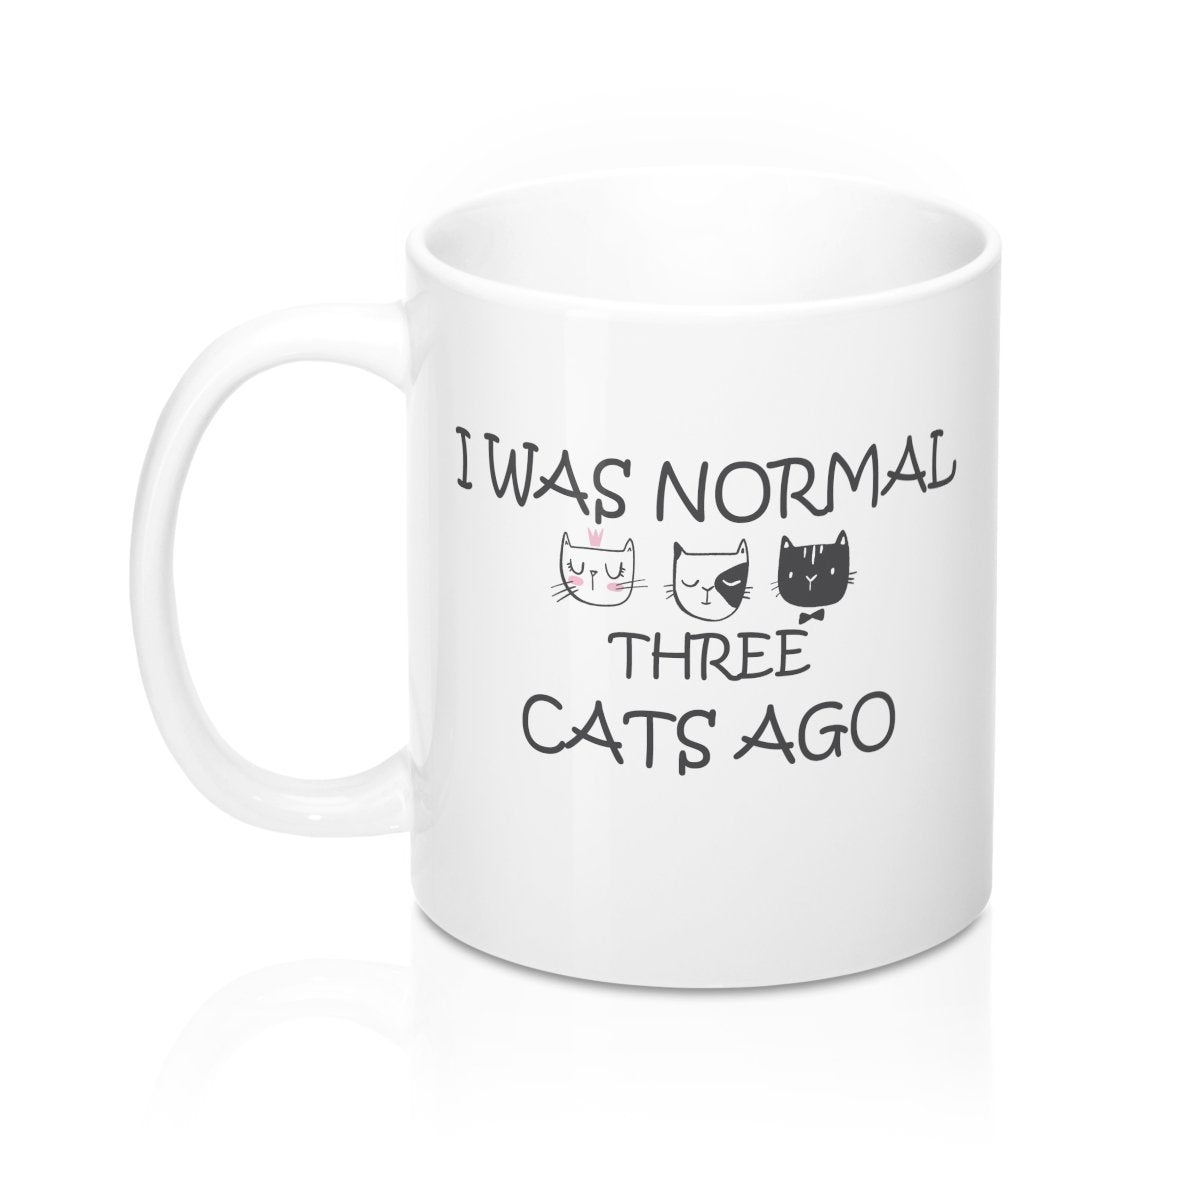 Gaga Gift for Cat Lover, Cat Coffee Mug Featuring the Text I Was Normal Three Cats Ago and Three Adorable Kitty Cat Faces